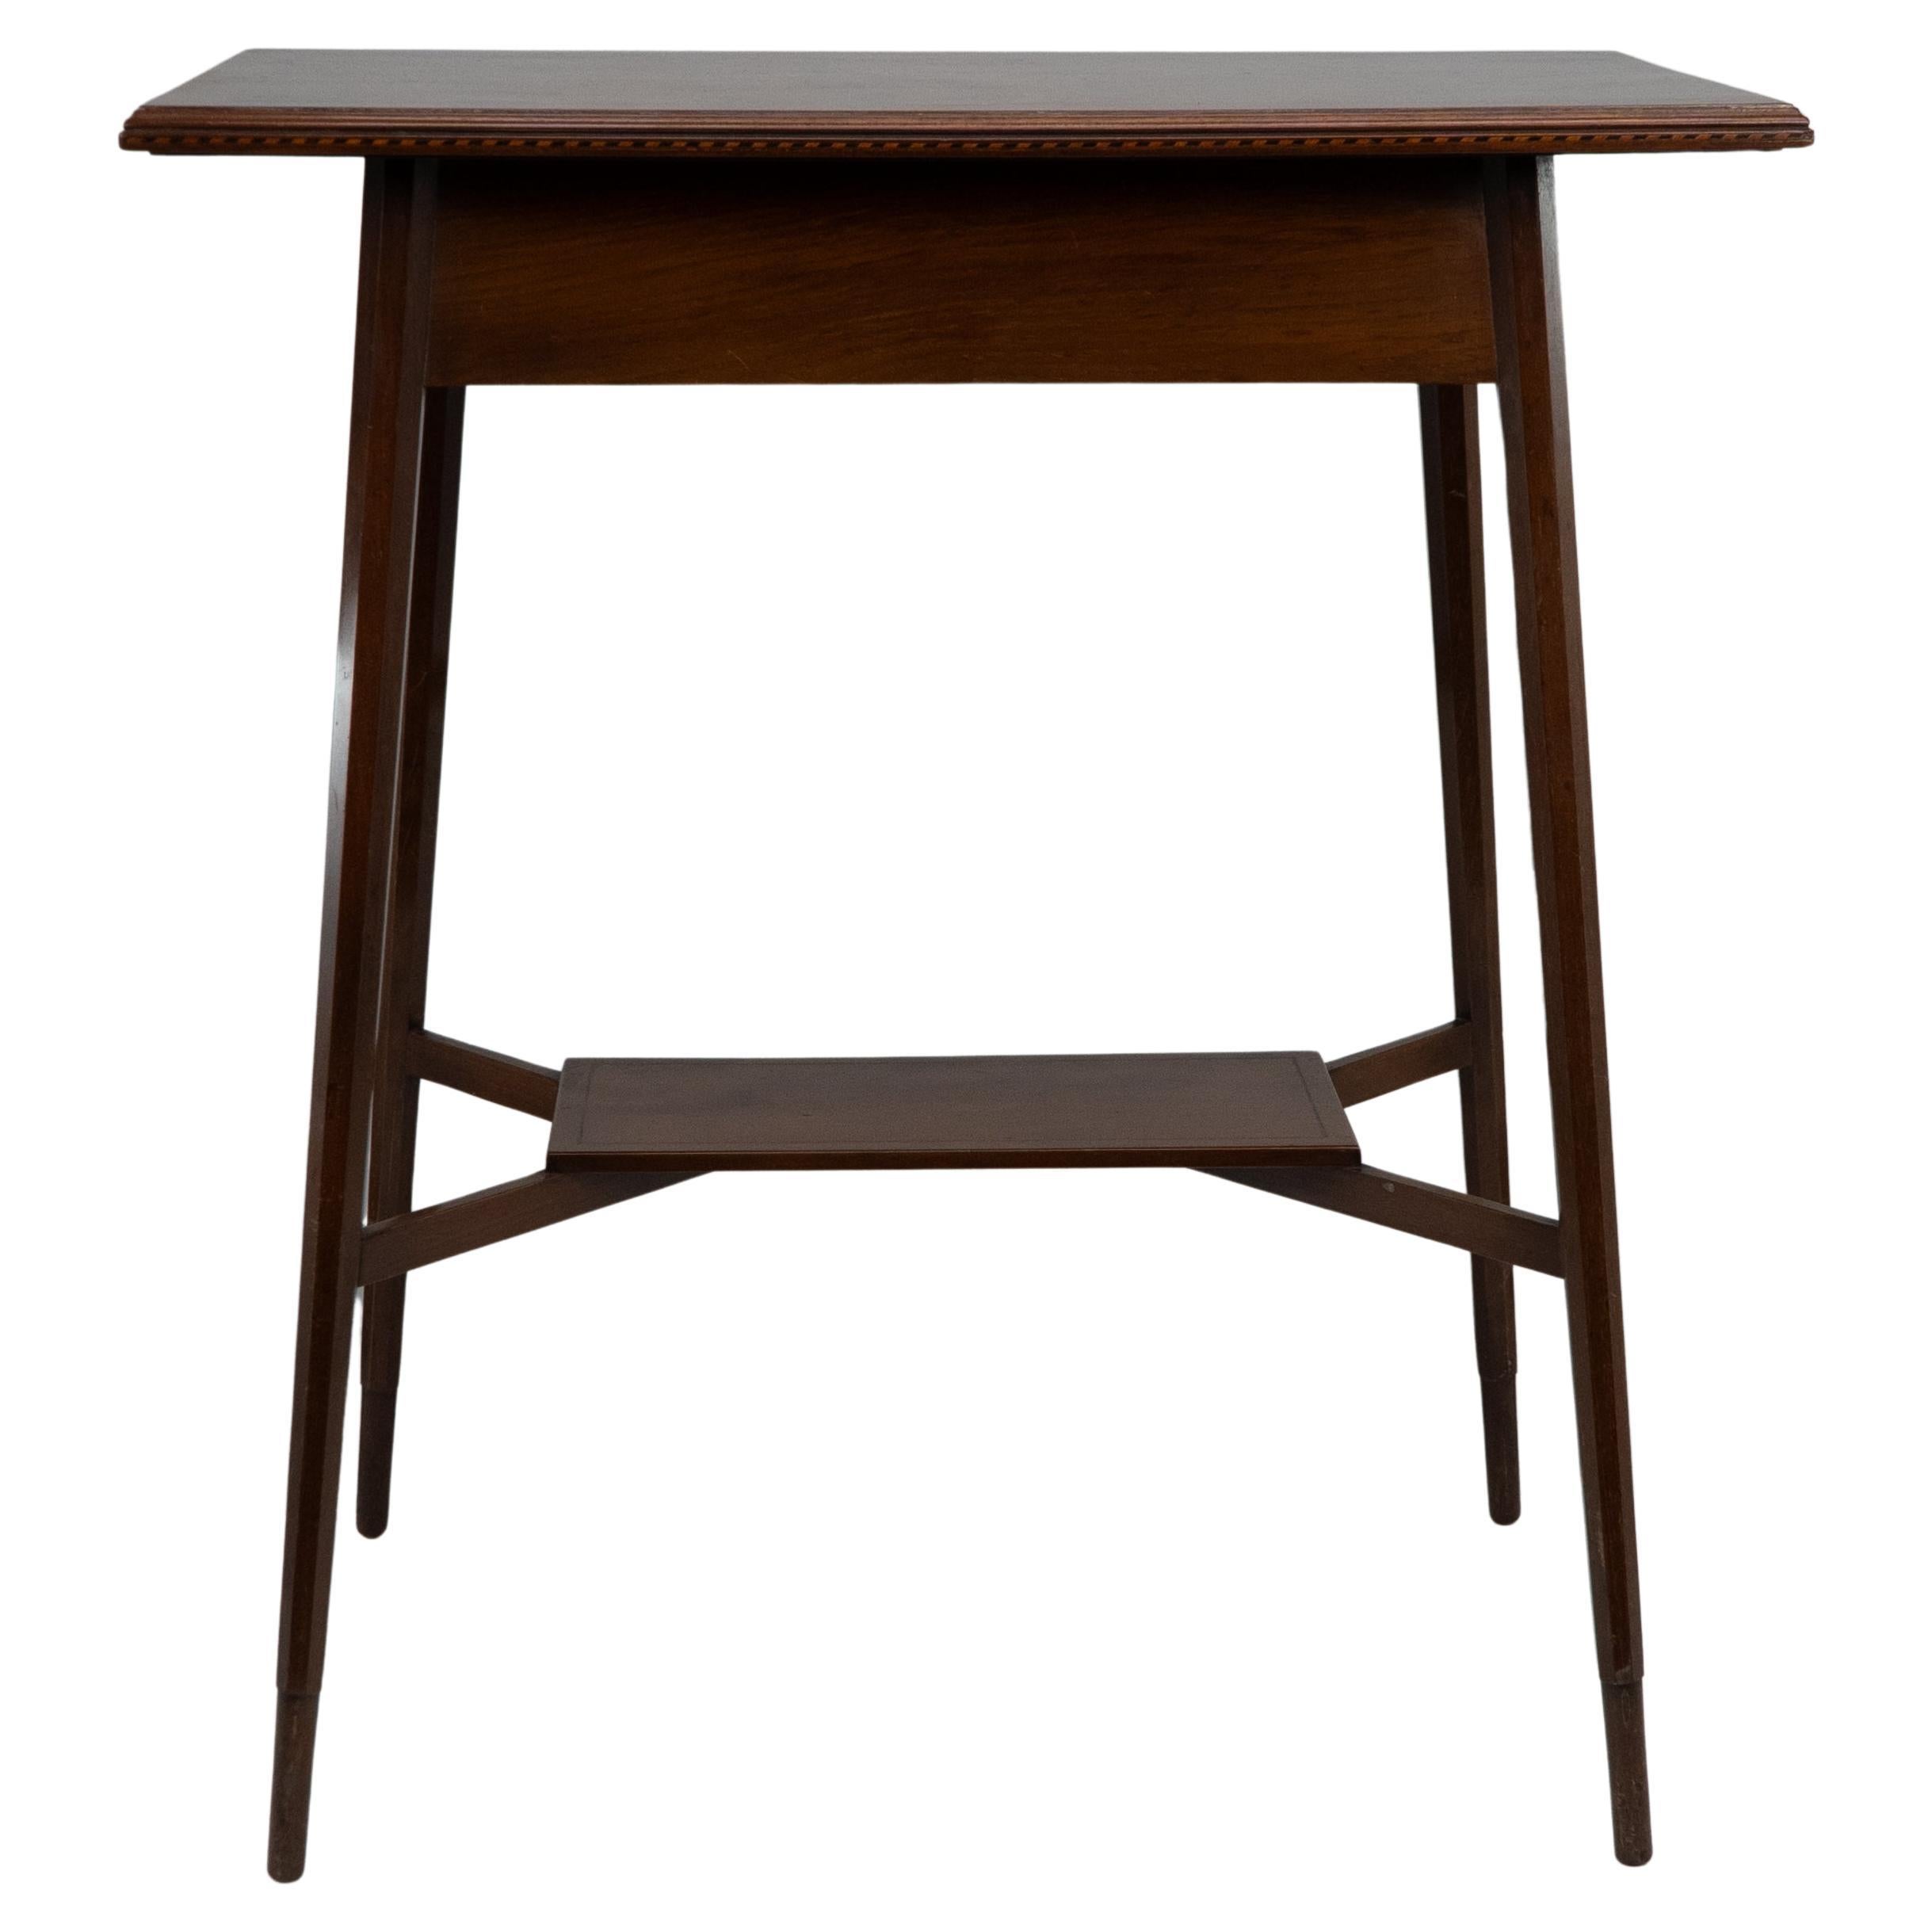 Morris & Co. A fine quality Aesthetic Movement walnut side table.